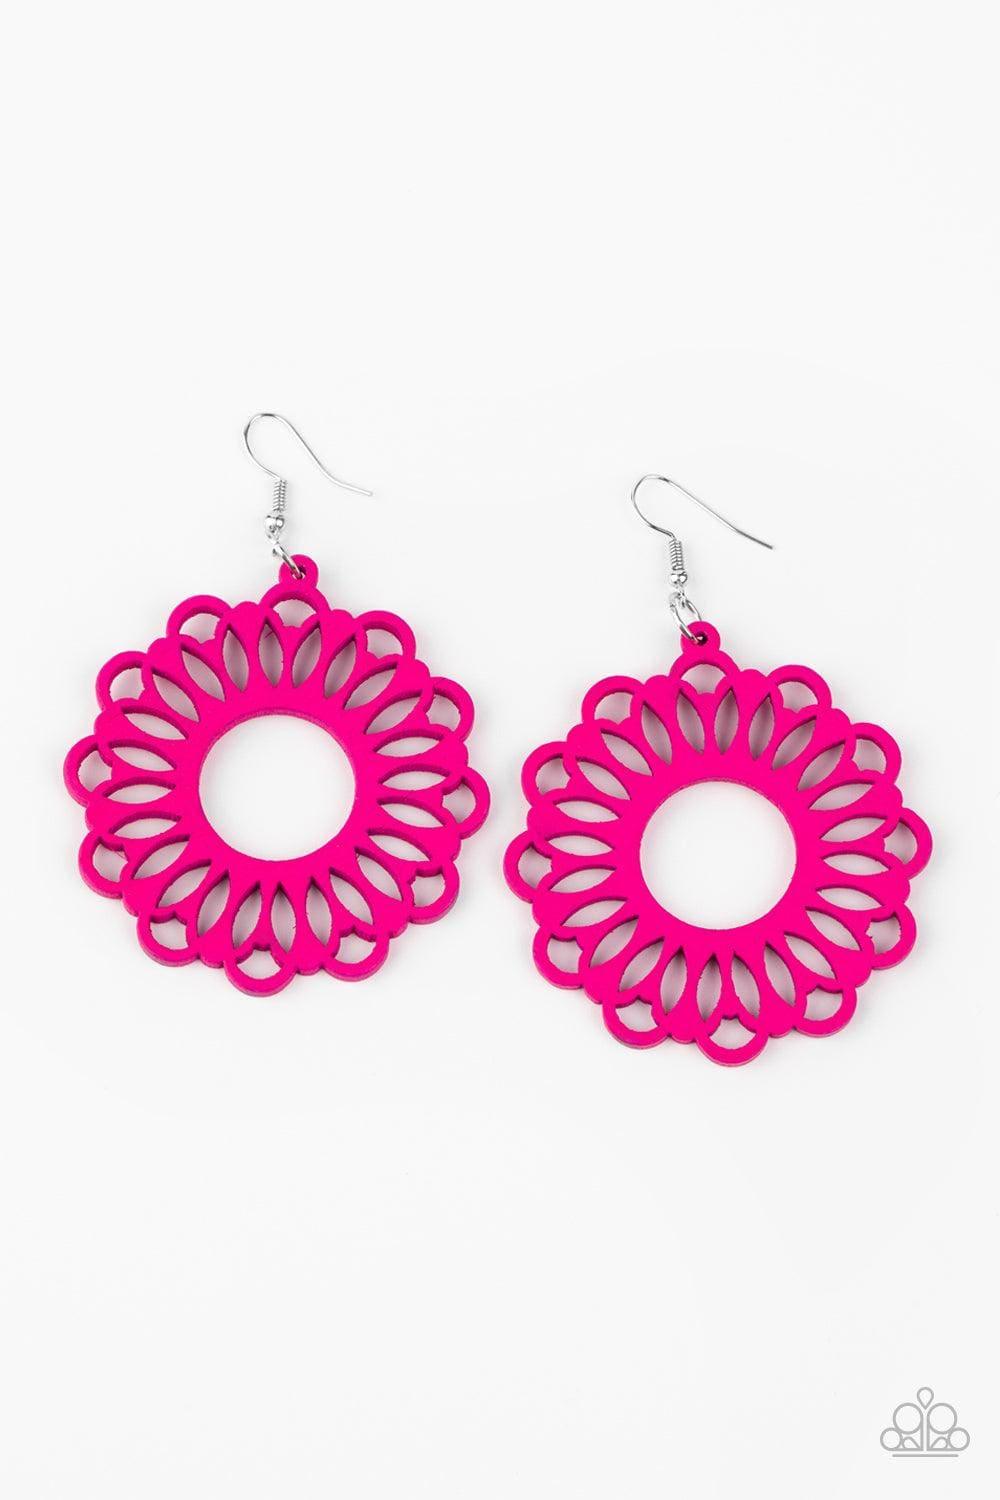 Paparazzi Accessories - Dominican Daisy - Pink Earrings - Bling by JessieK